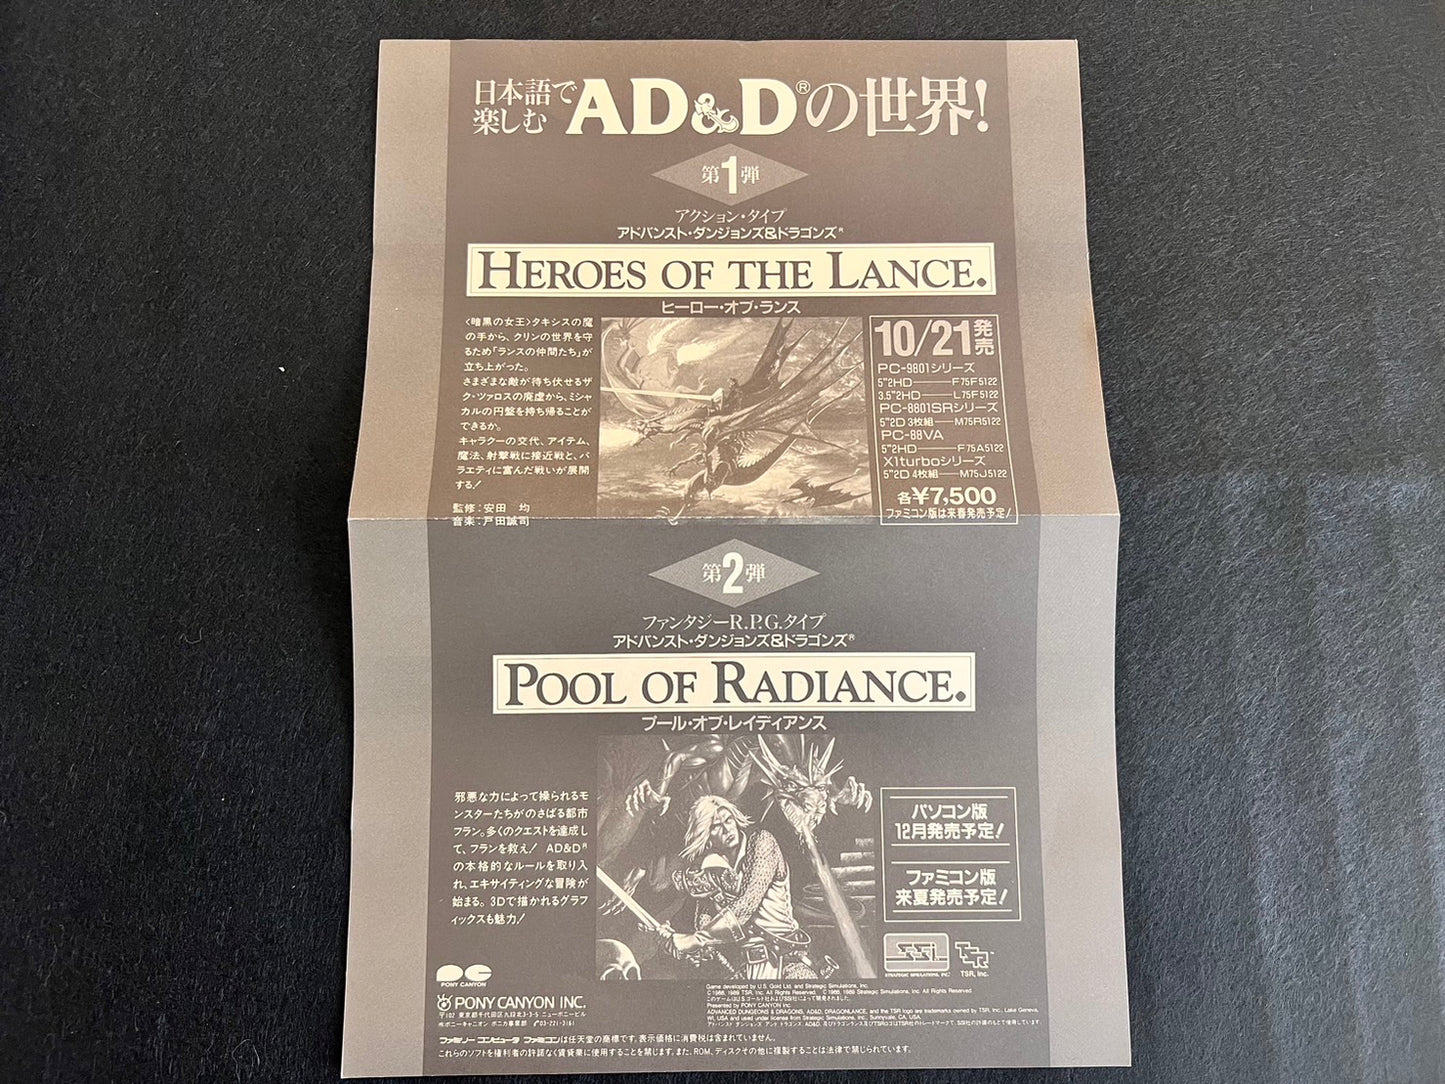 PC-9801 Advanced Dungeons and Dragons HEROES of The Lance, Not teseted